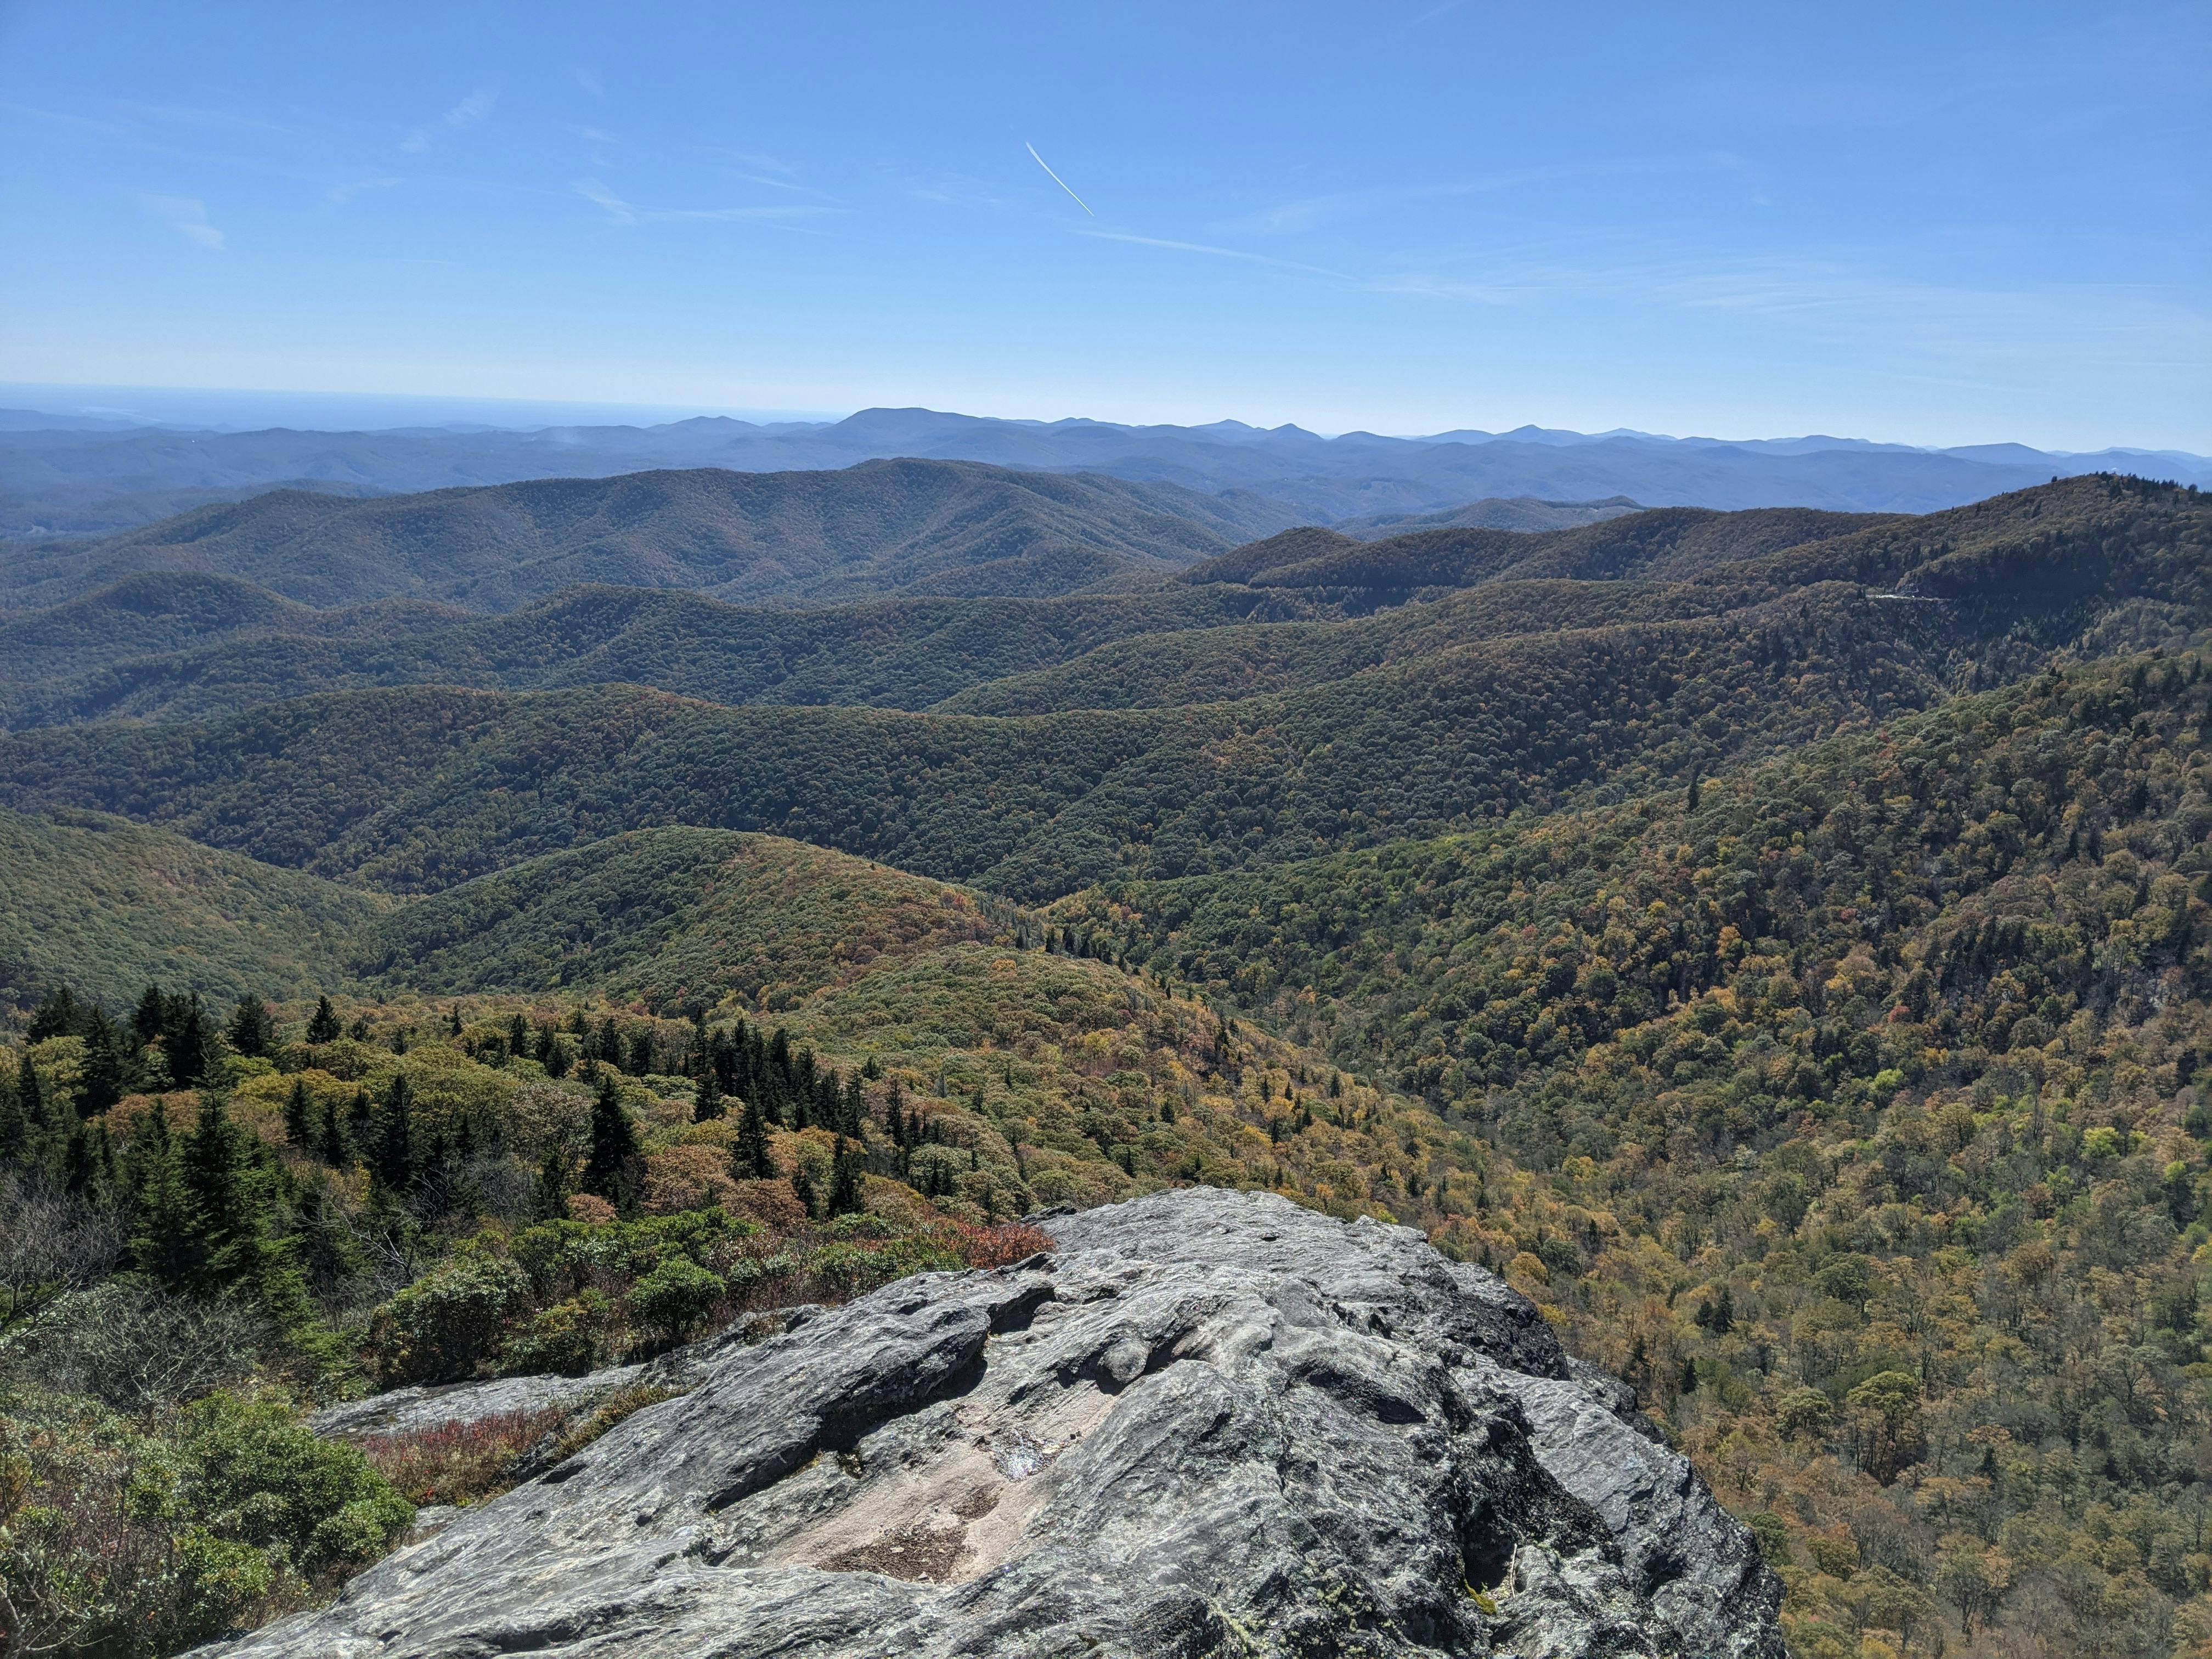 An expansive view of the rolling hills of Shining Rock Wilderness